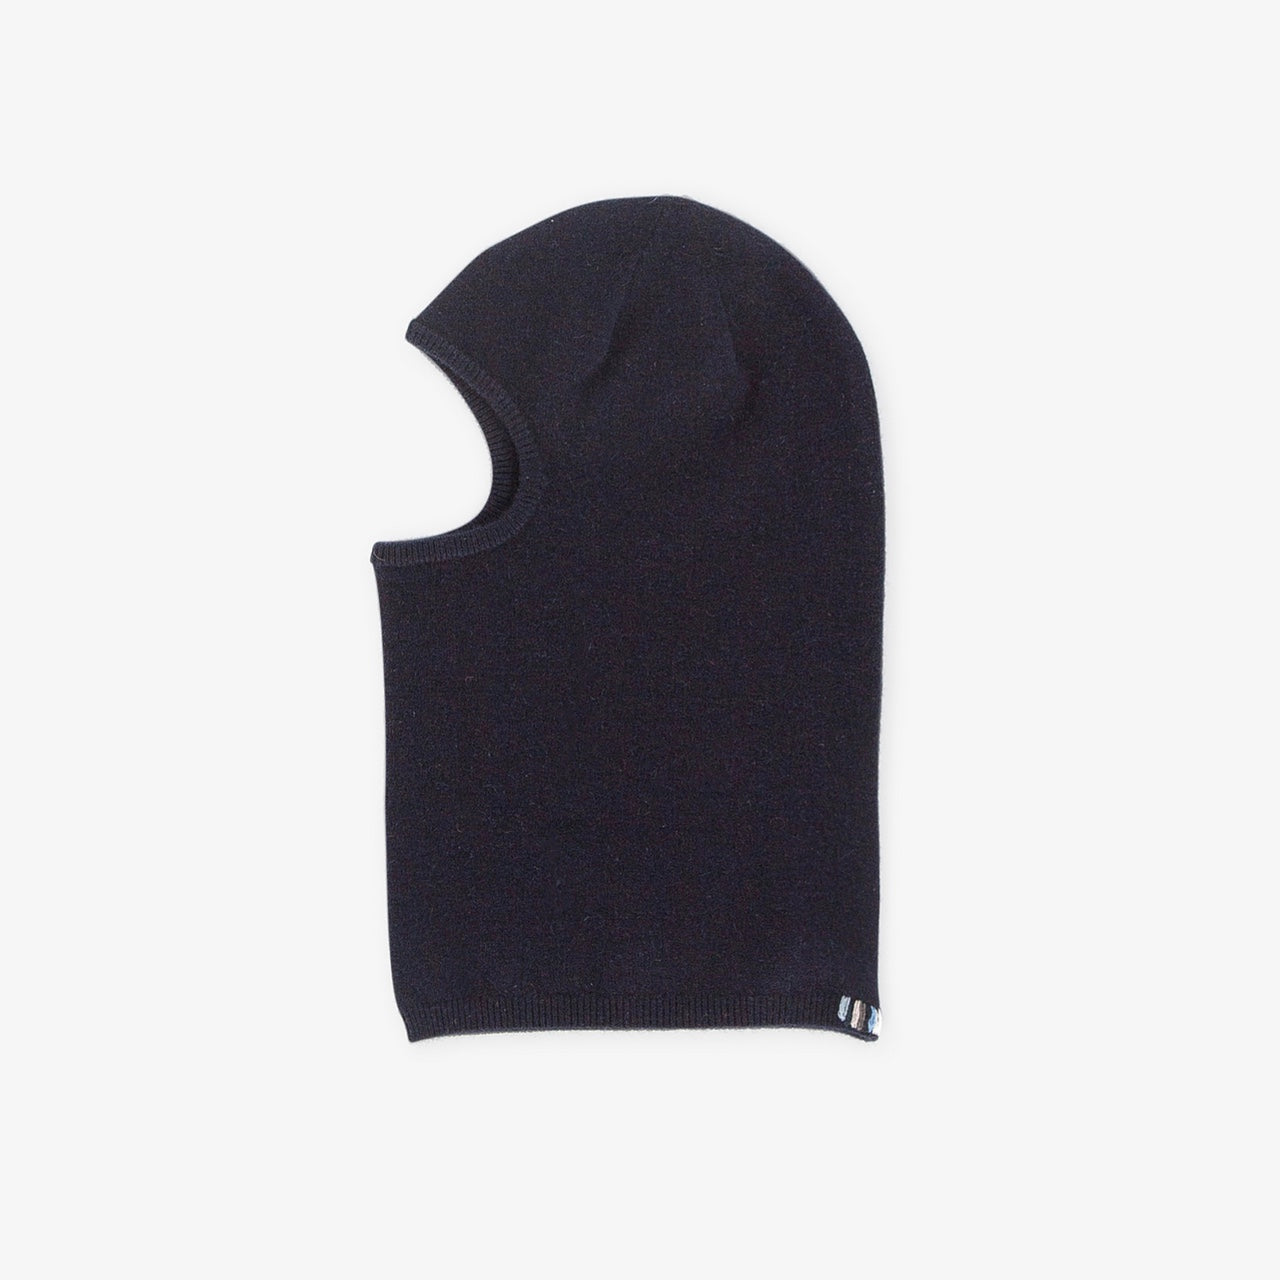 Popies Cashmere Balaclava in Navy